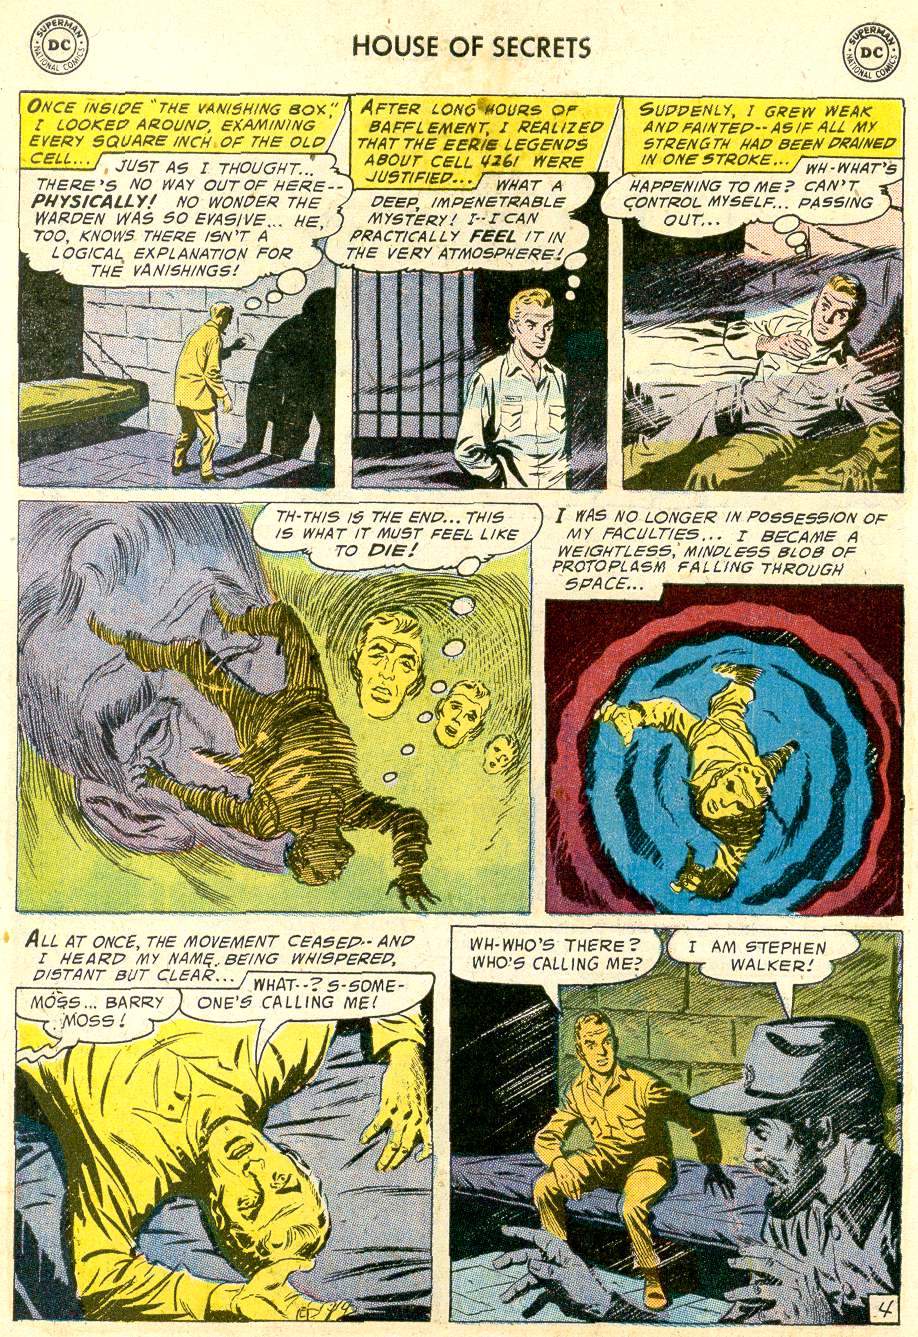 House of Secrets (1956) Issue #3 #3 - English 6